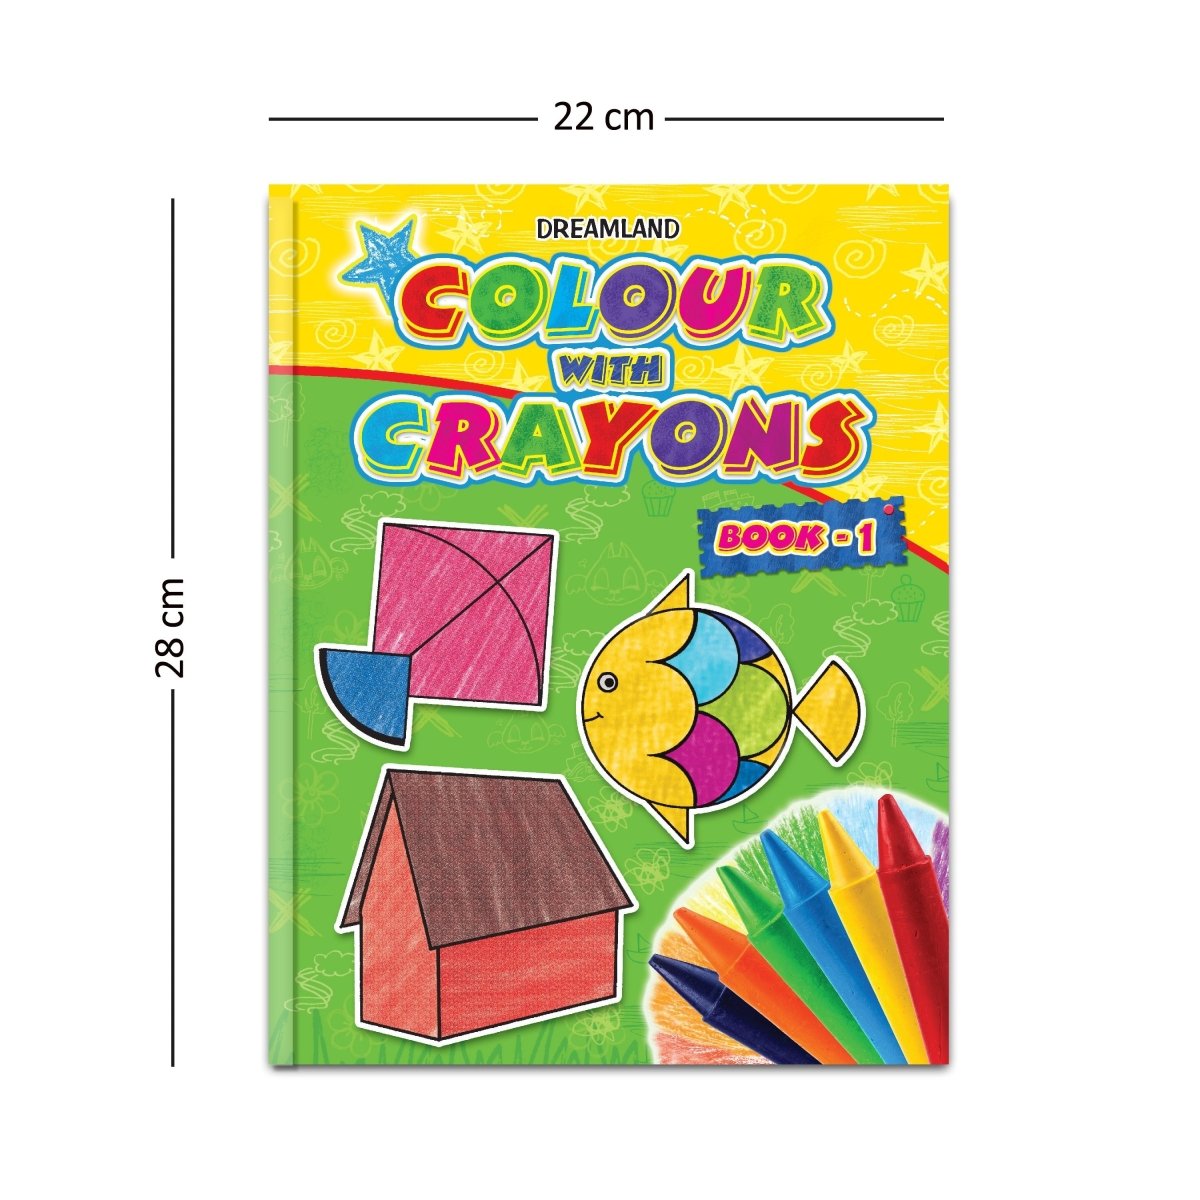 Dreamland Publications Colour With Crayons- 1 to 5 (Pack) - 9789350892022